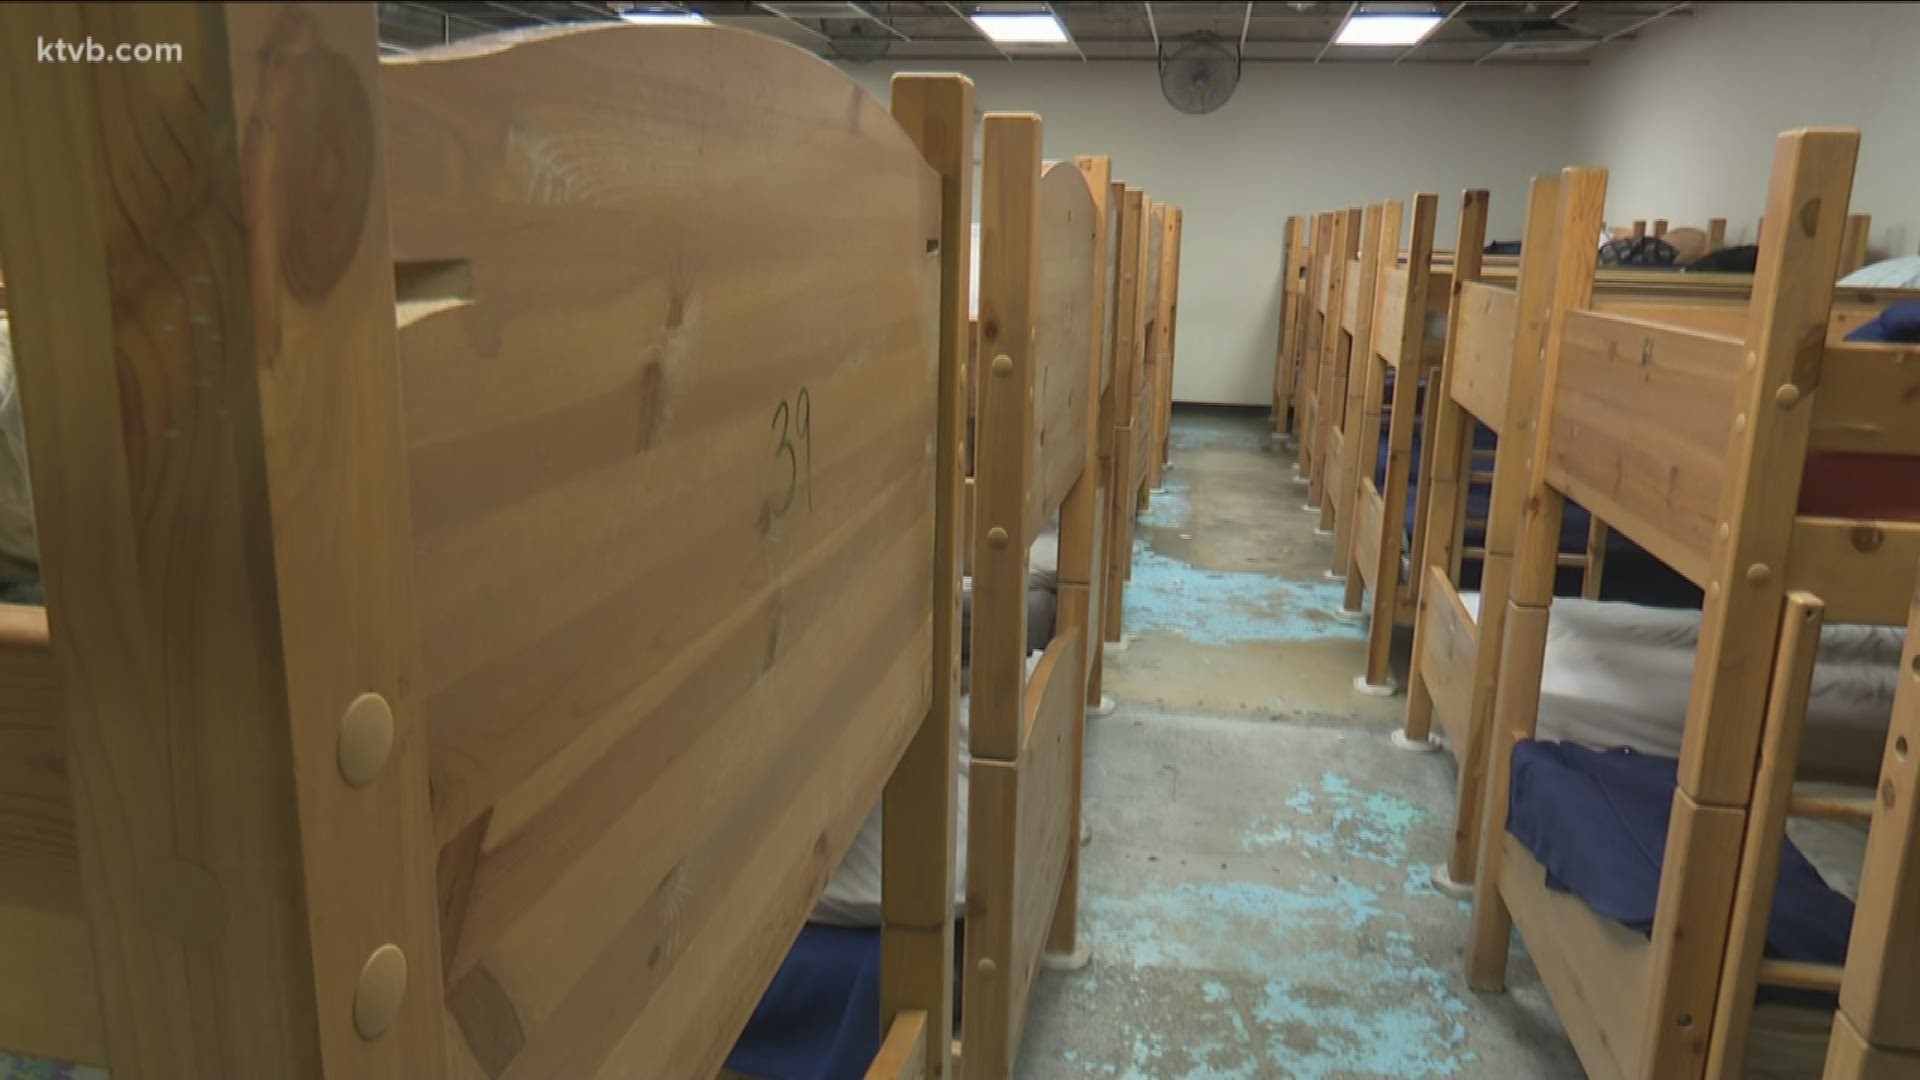 The high price of rent in the Boise area is forcing some people into homeless shelters.